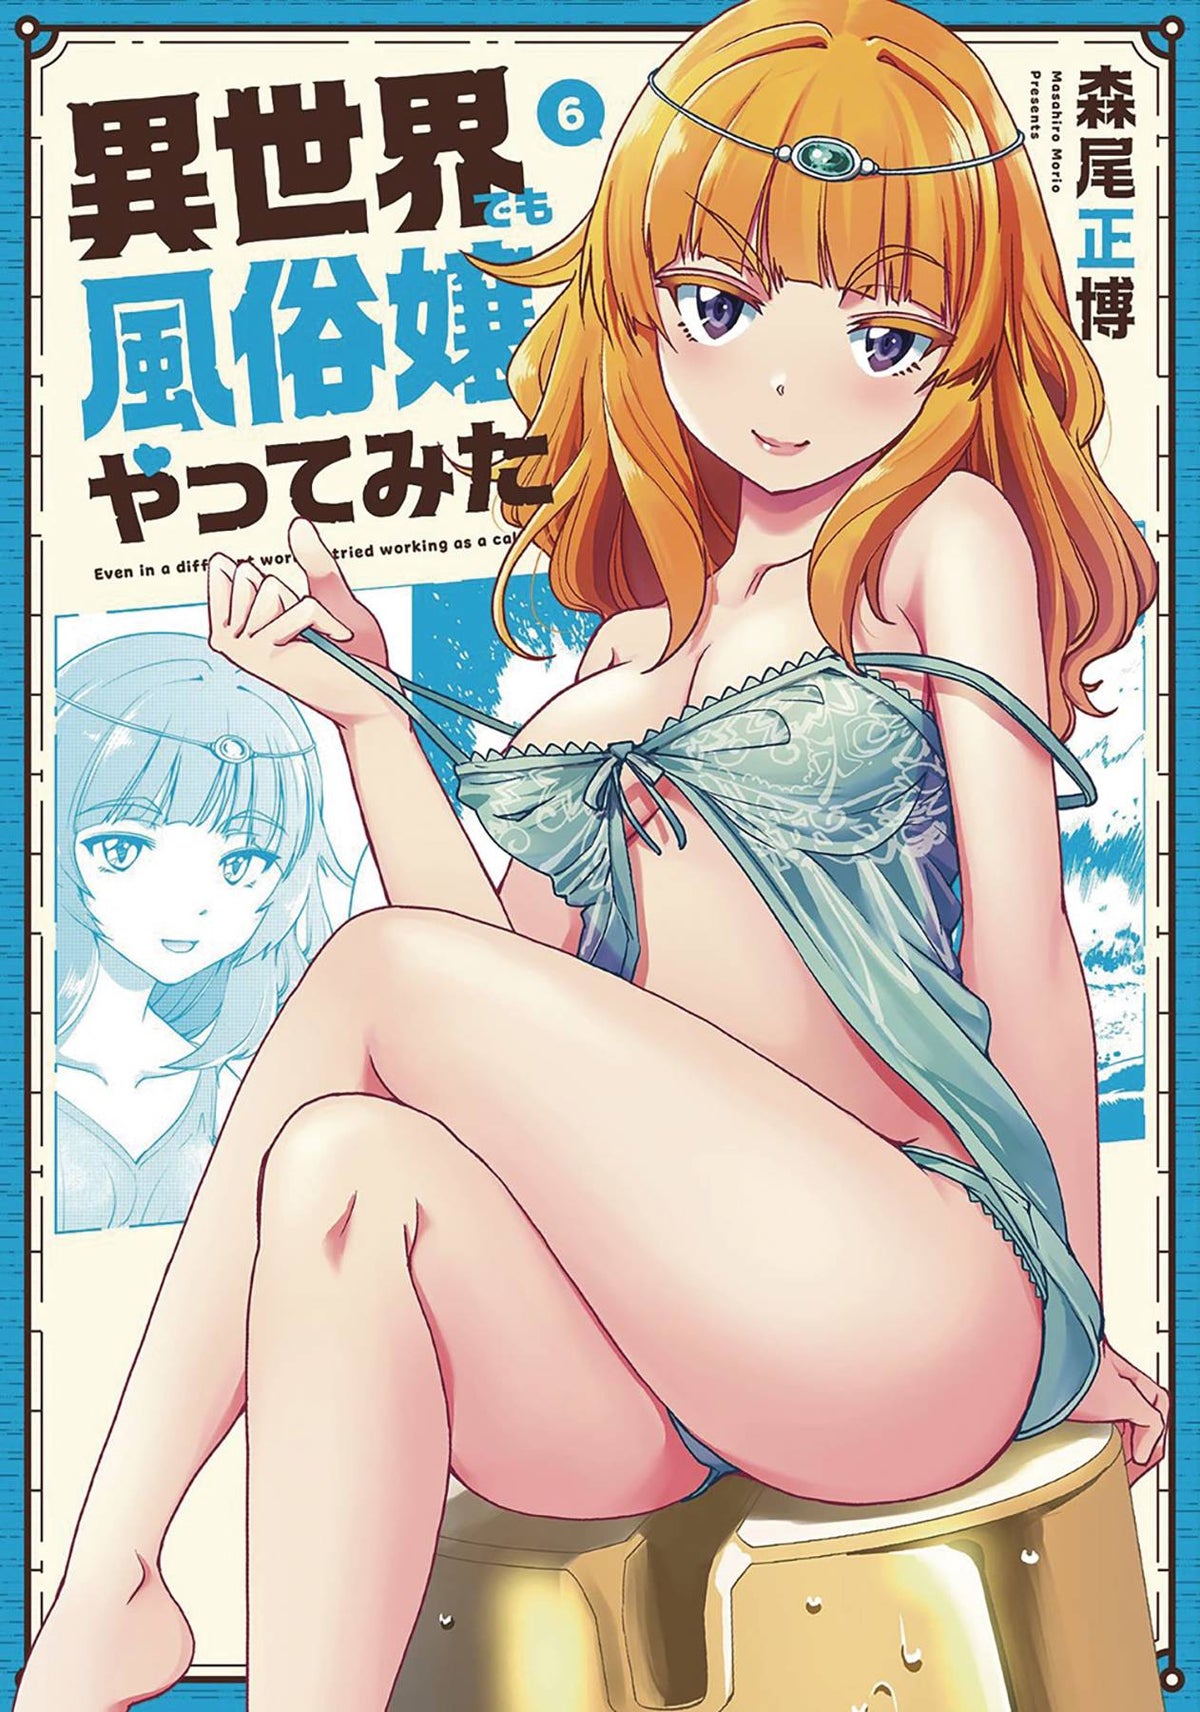 CALL GIRL IN ANOTHER WORLD GN VOL 06 (MR) - Third Eye